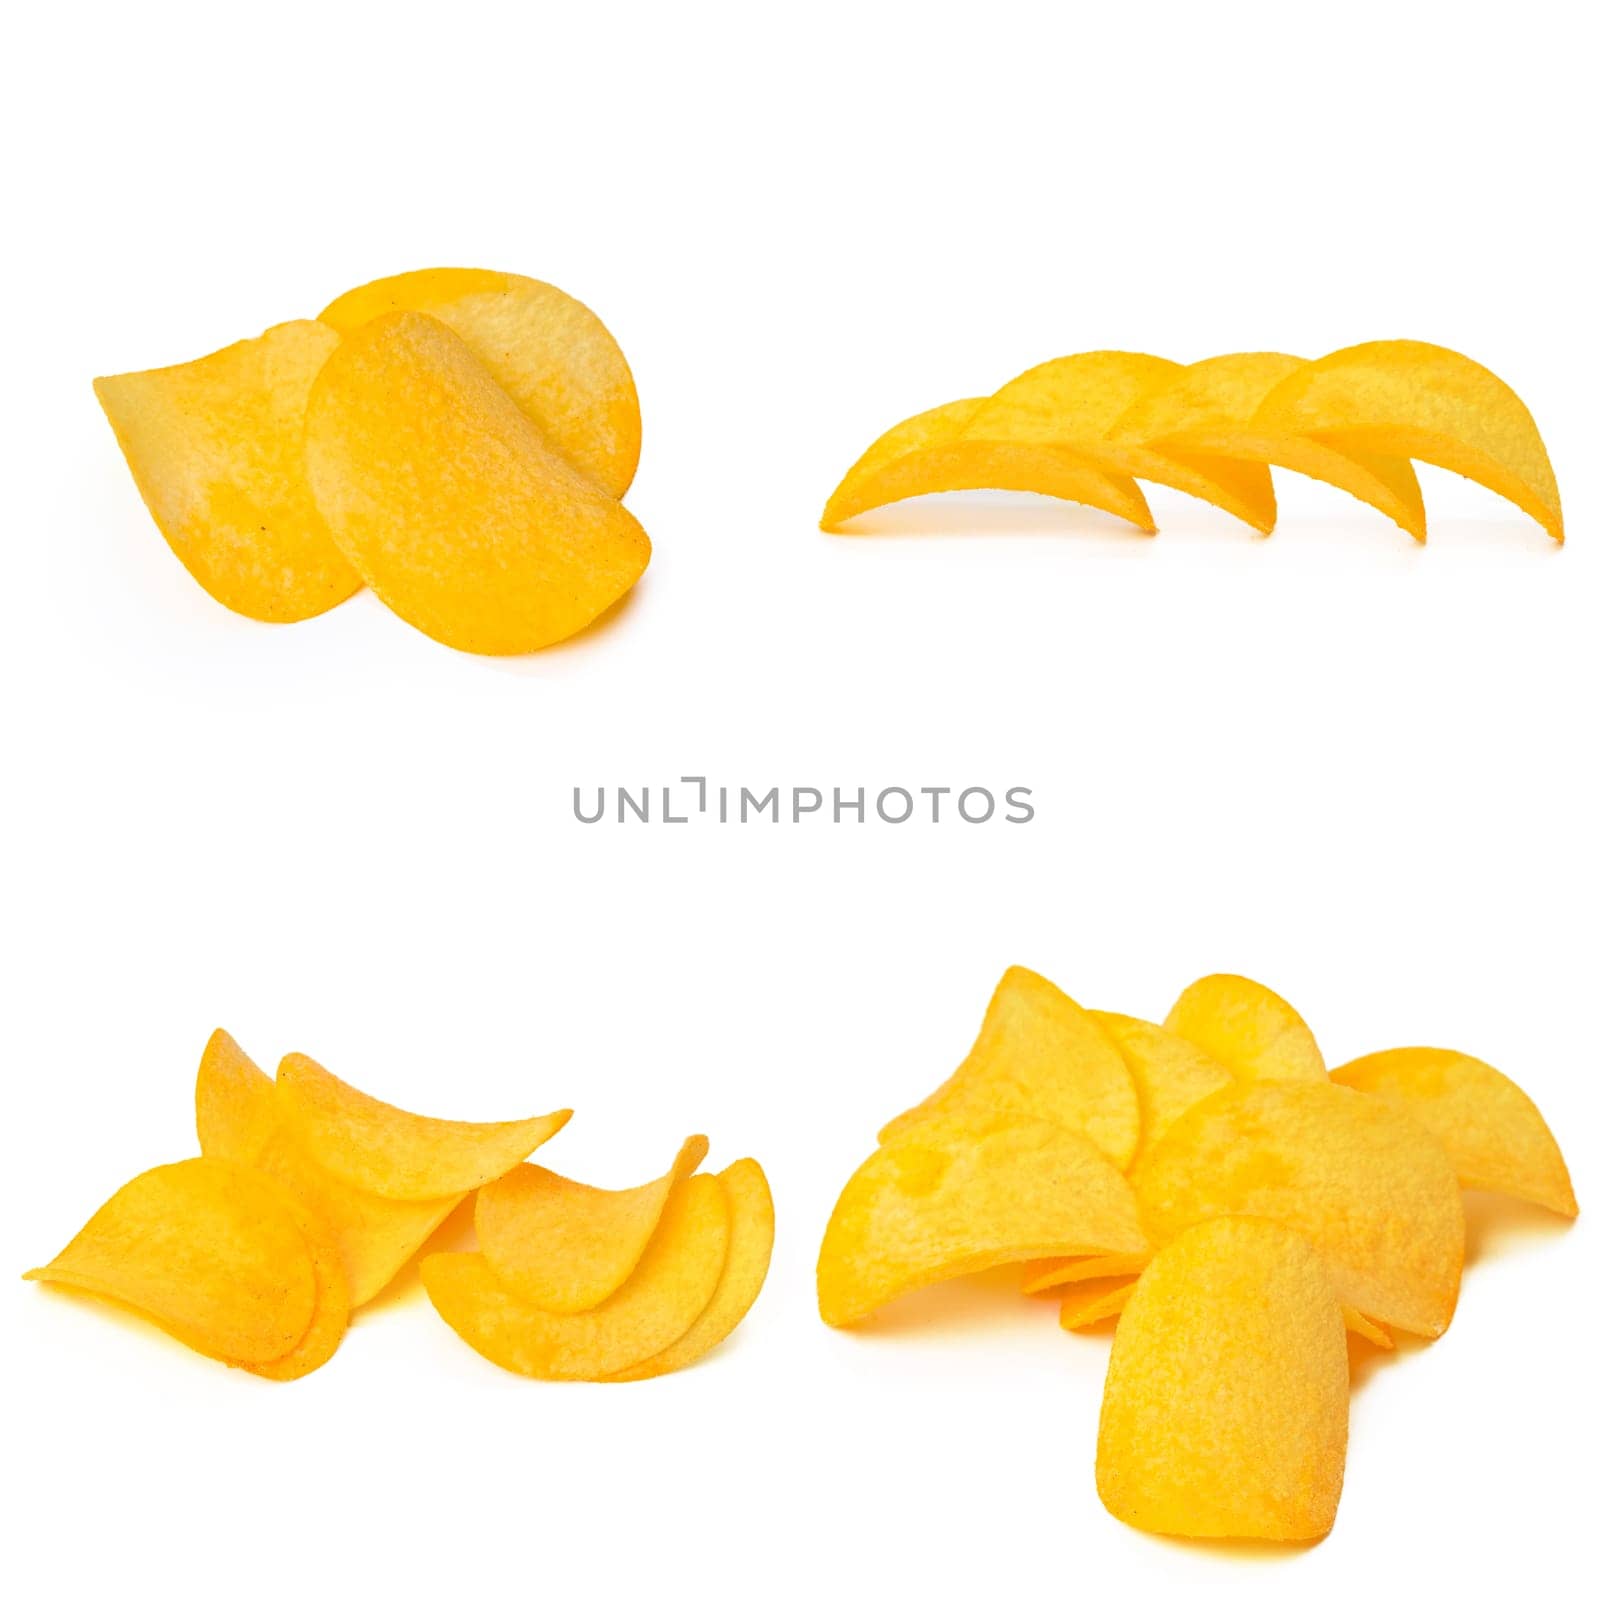 Potato chips isolated on white background. Collection.